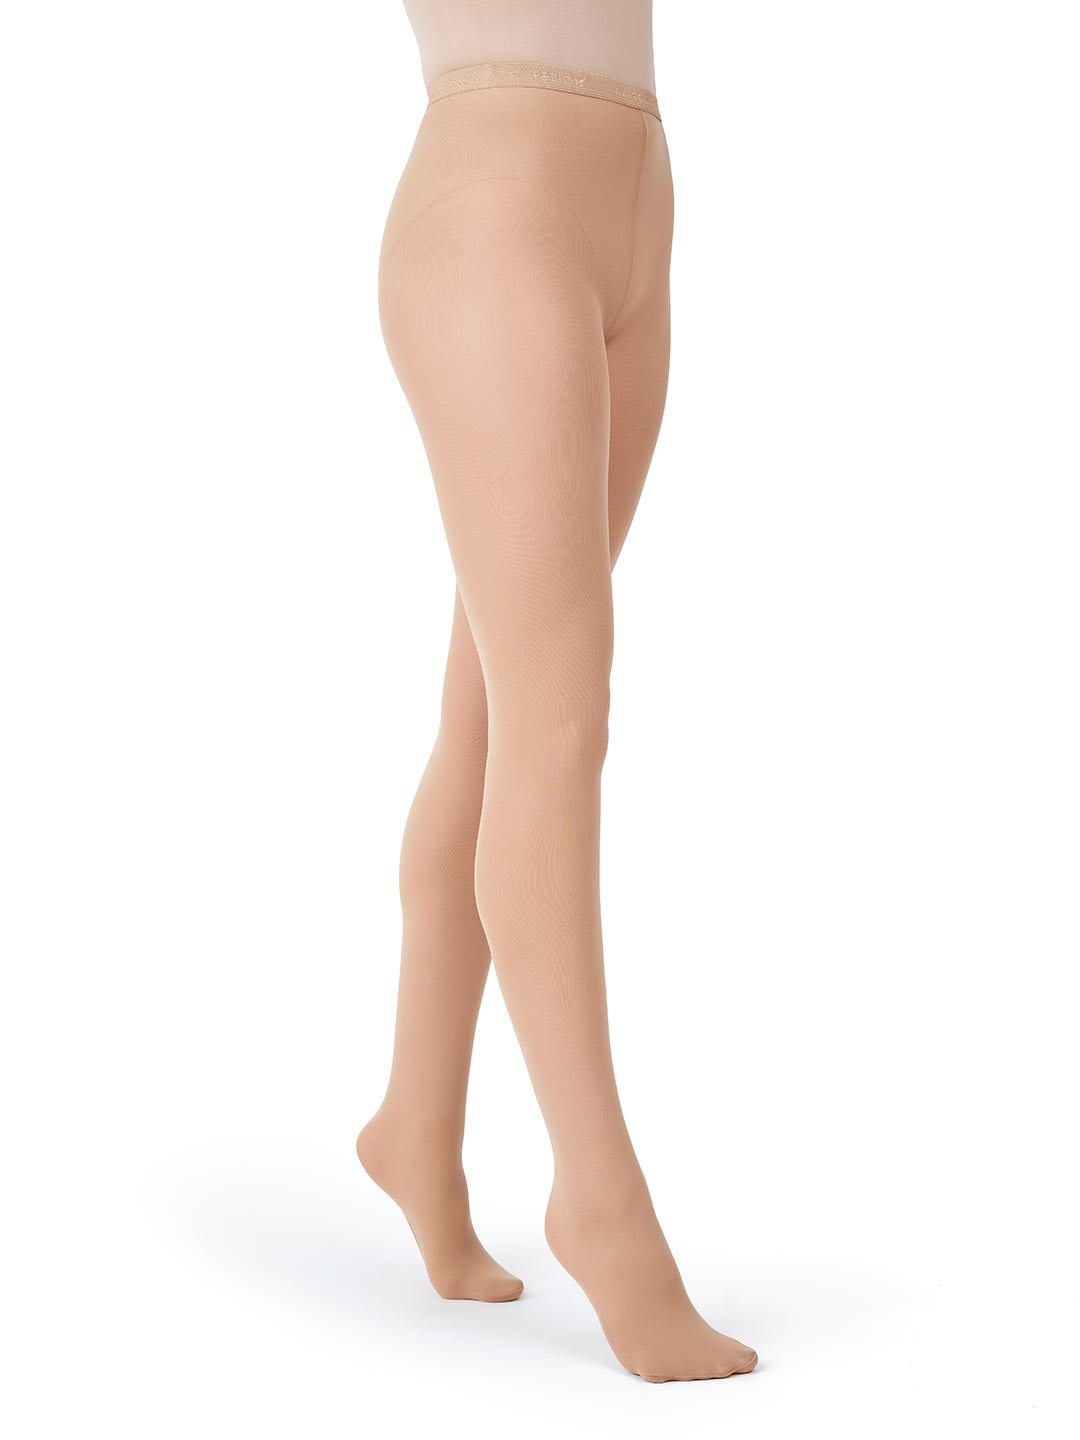 CAPEZIO HOLD N STRETCH Footless tights style #140 4 colors offered  ch/ladies - General Maintenance & Diagnostics Ltd